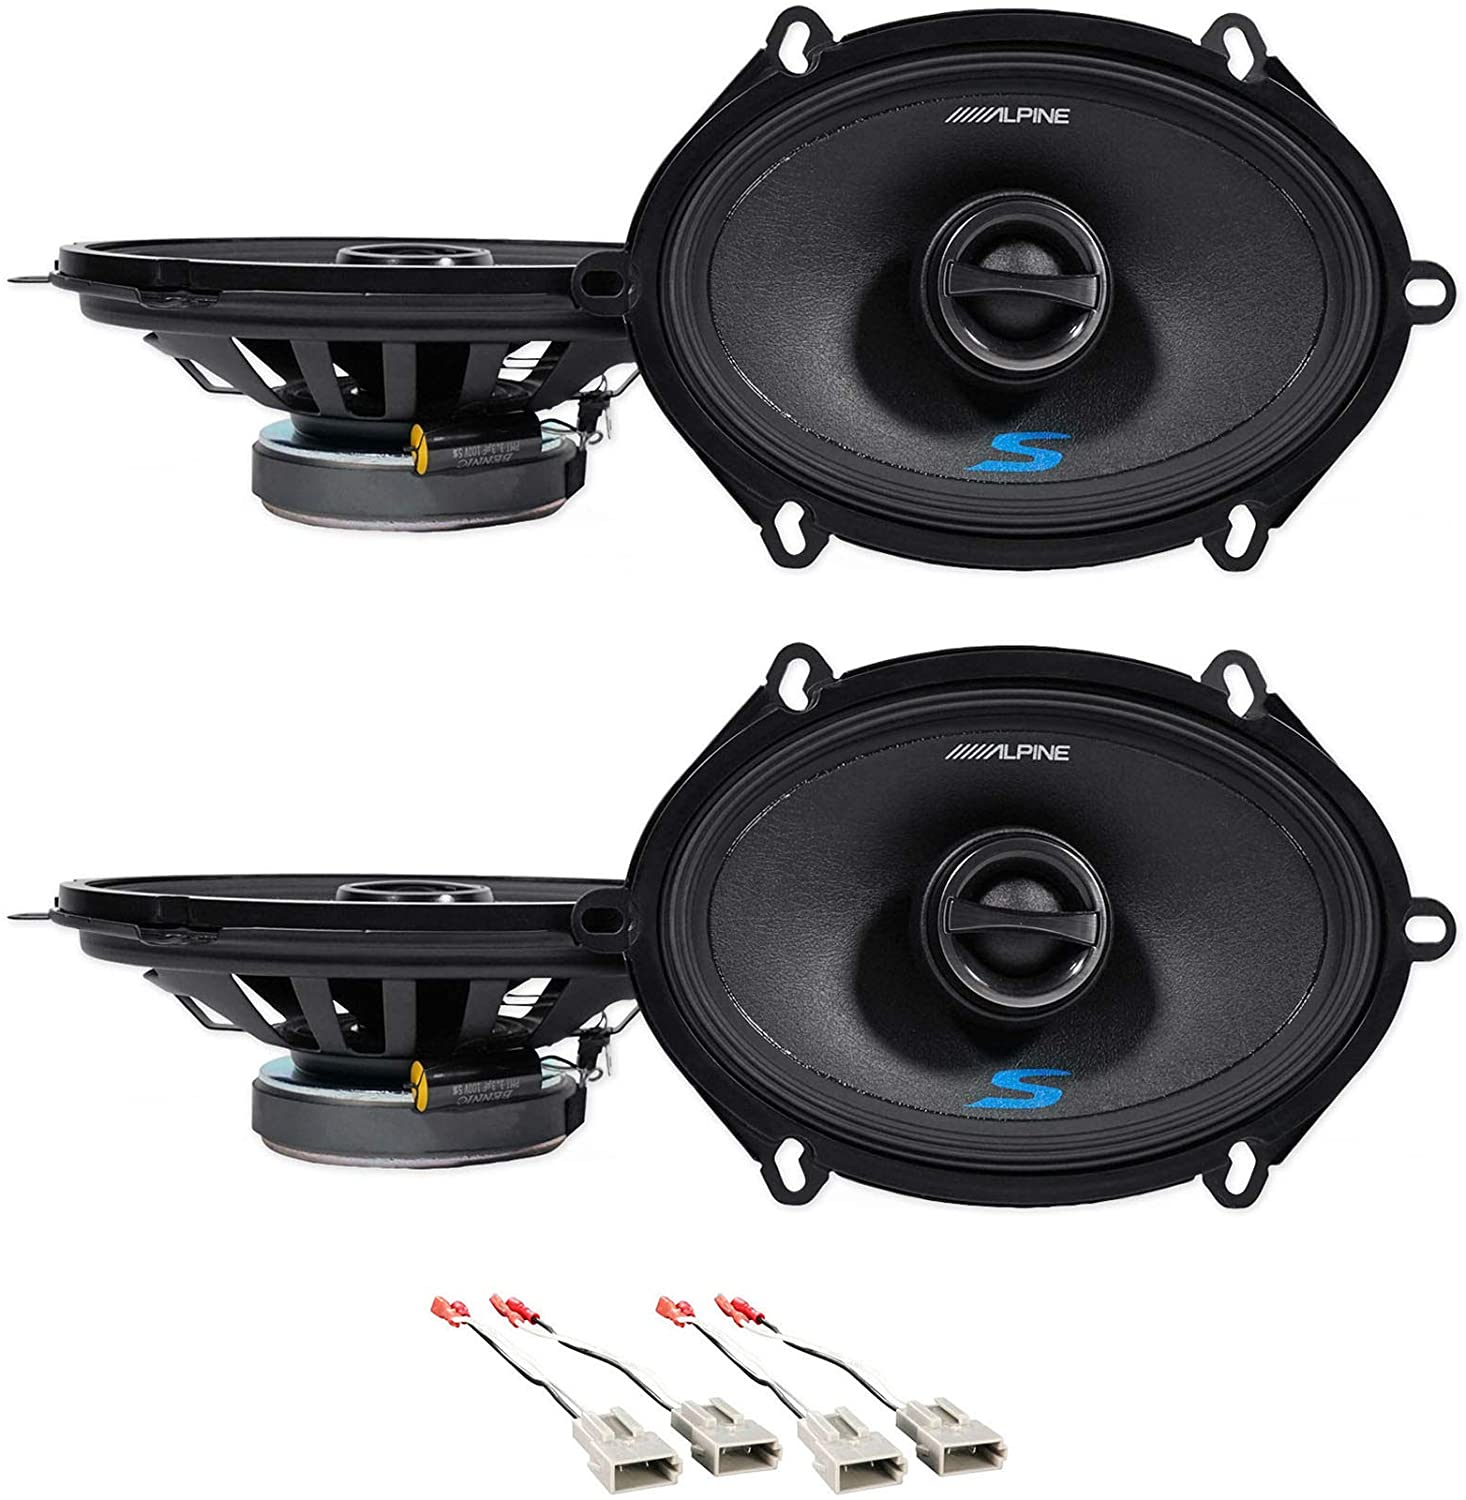 Front+Rear Alpine S 5x7" Speaker Replacement Kit For 1997-2001 Mercury Mountaineer